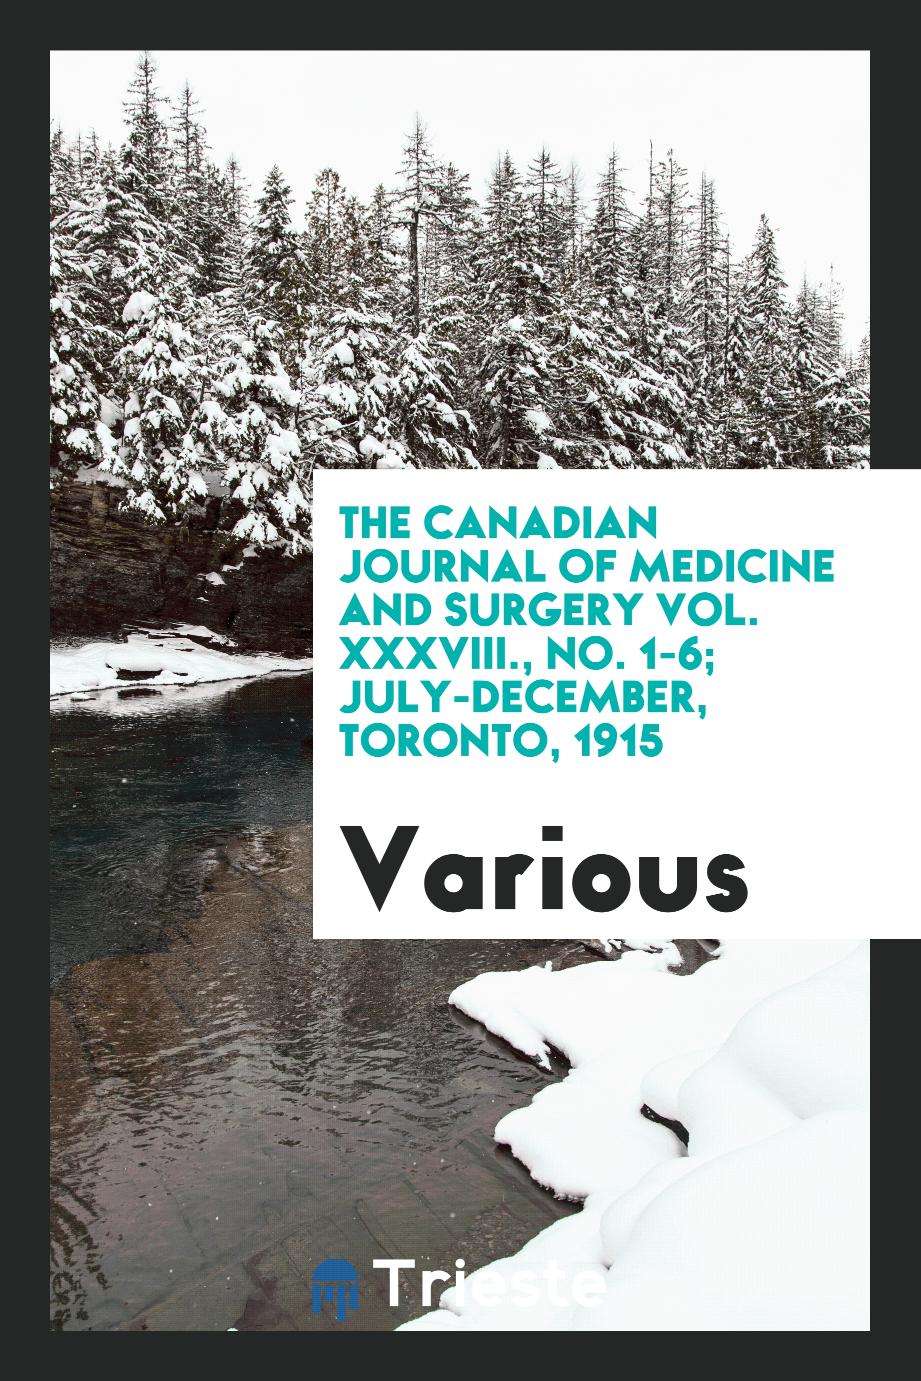 The Canadian journal of medicine and surgery Vol. XXXVIII., No. 1-6; July-December, Toronto, 1915